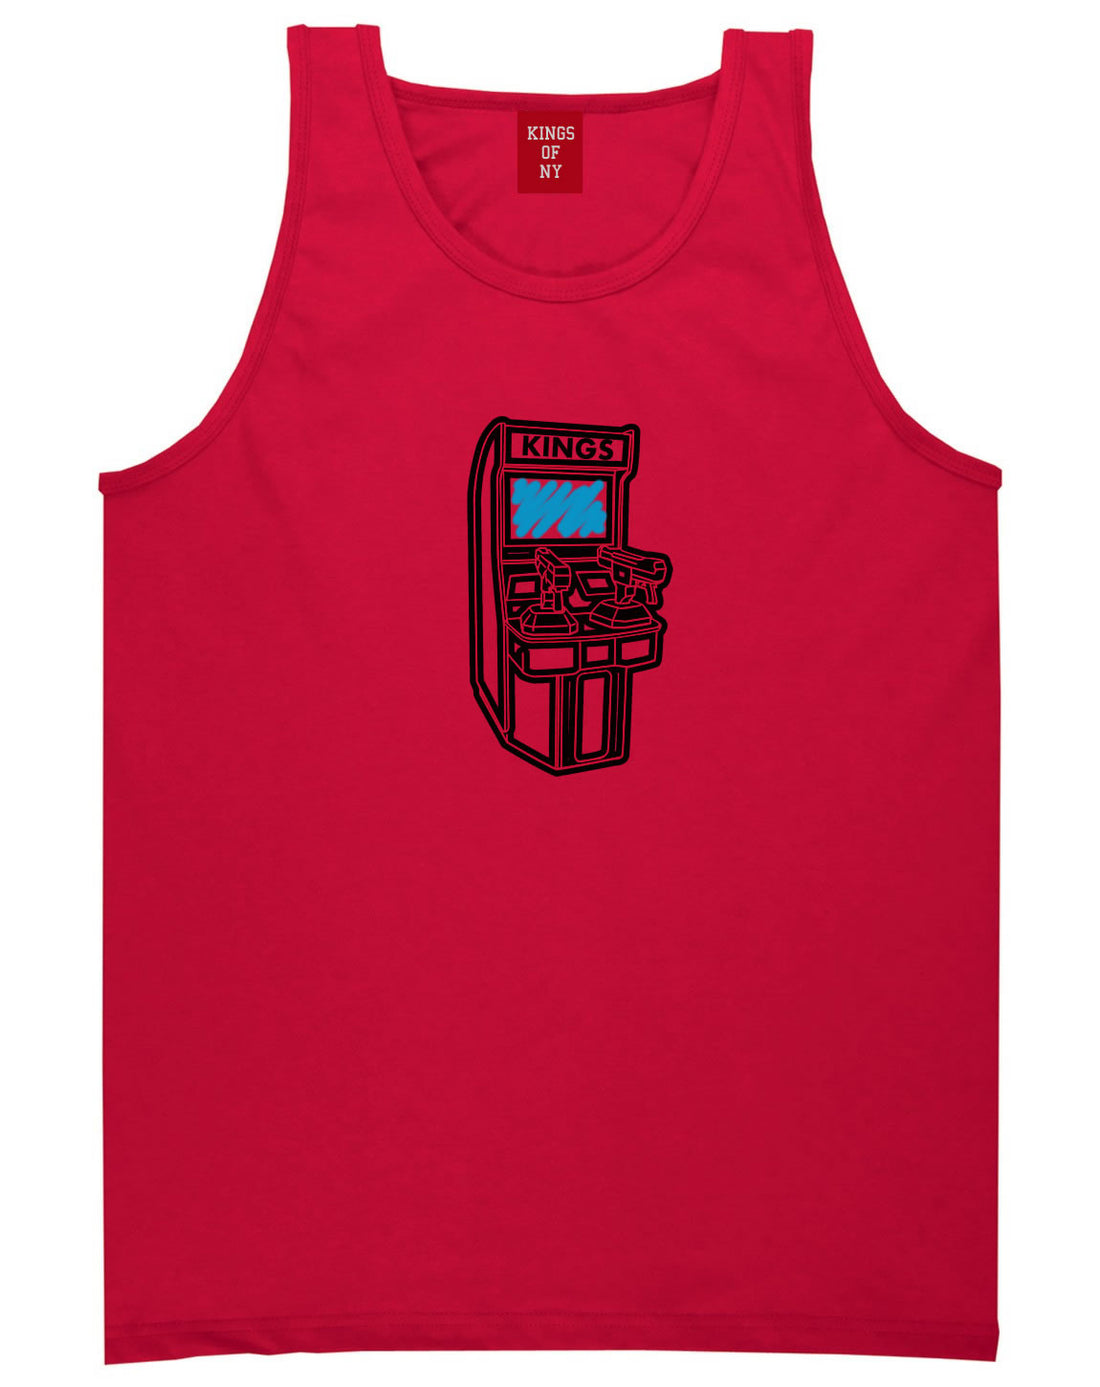 Arcade Game Gamer Tank Top in Red By Kings Of NY